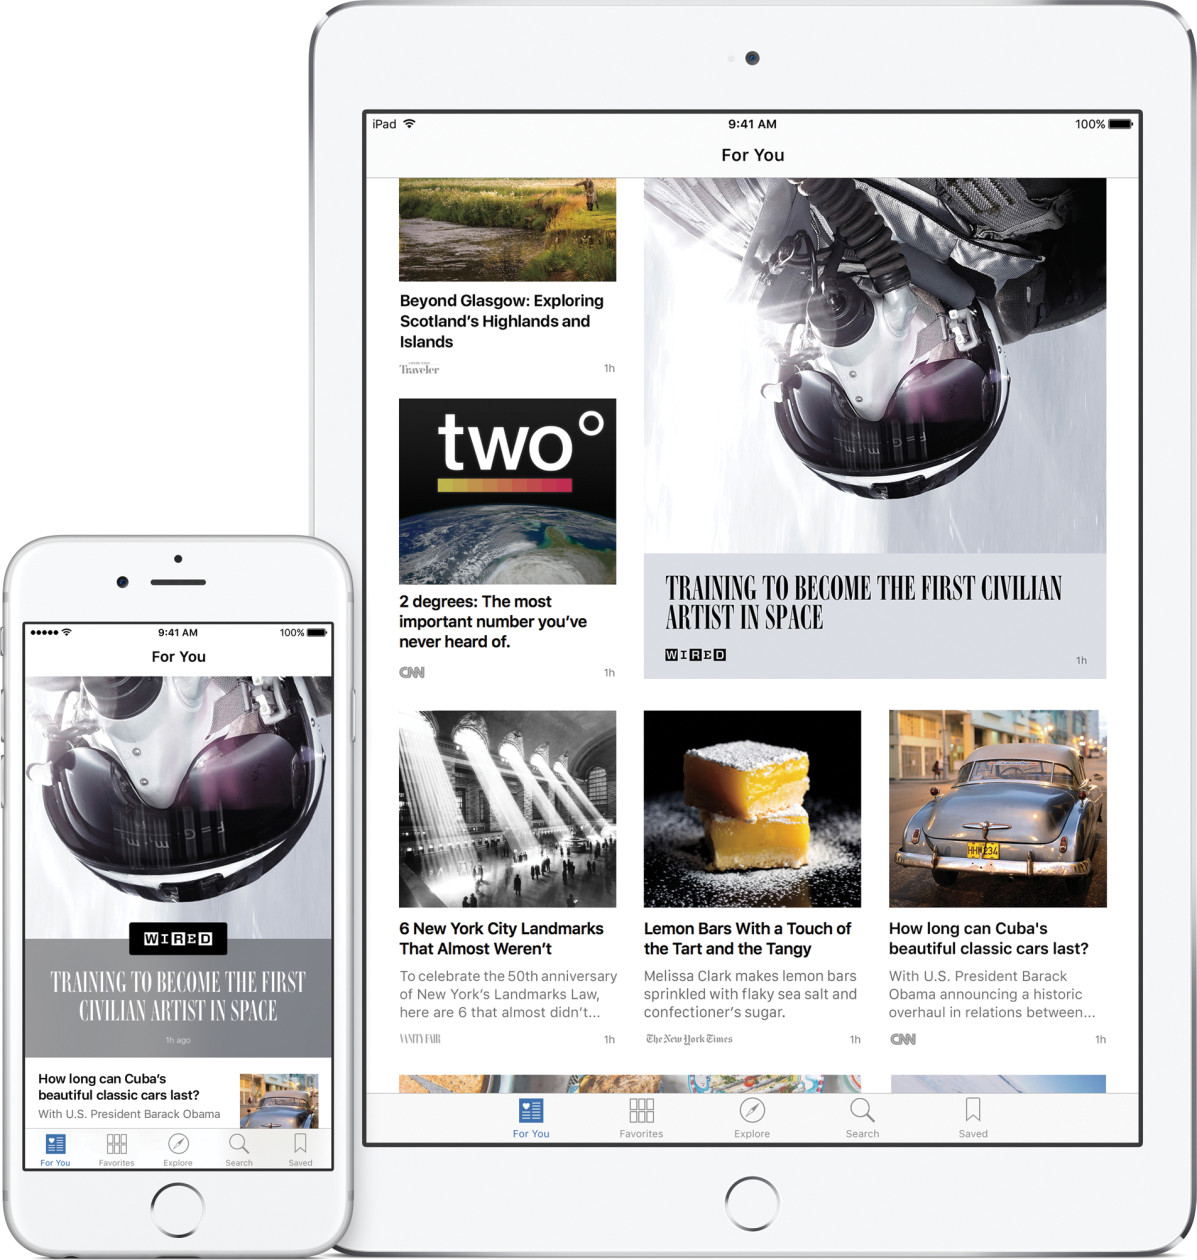 Apple should allow the distribution of paid content in the News app on iOS 9